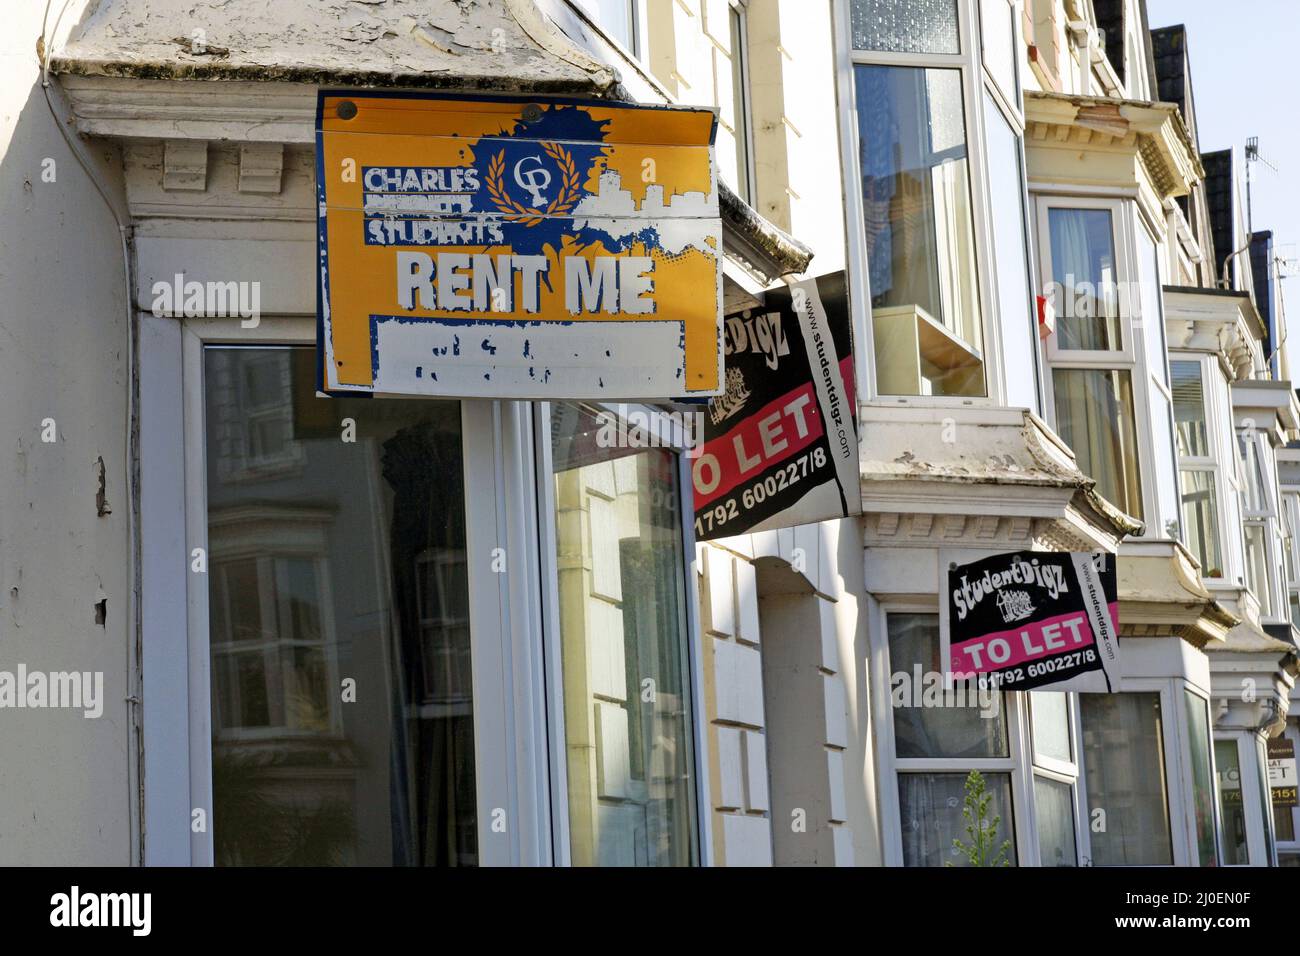 Swansea, Wales, UK, - September 4, 2019: Student letting signs on the front of terraced rental prope Stock Photo